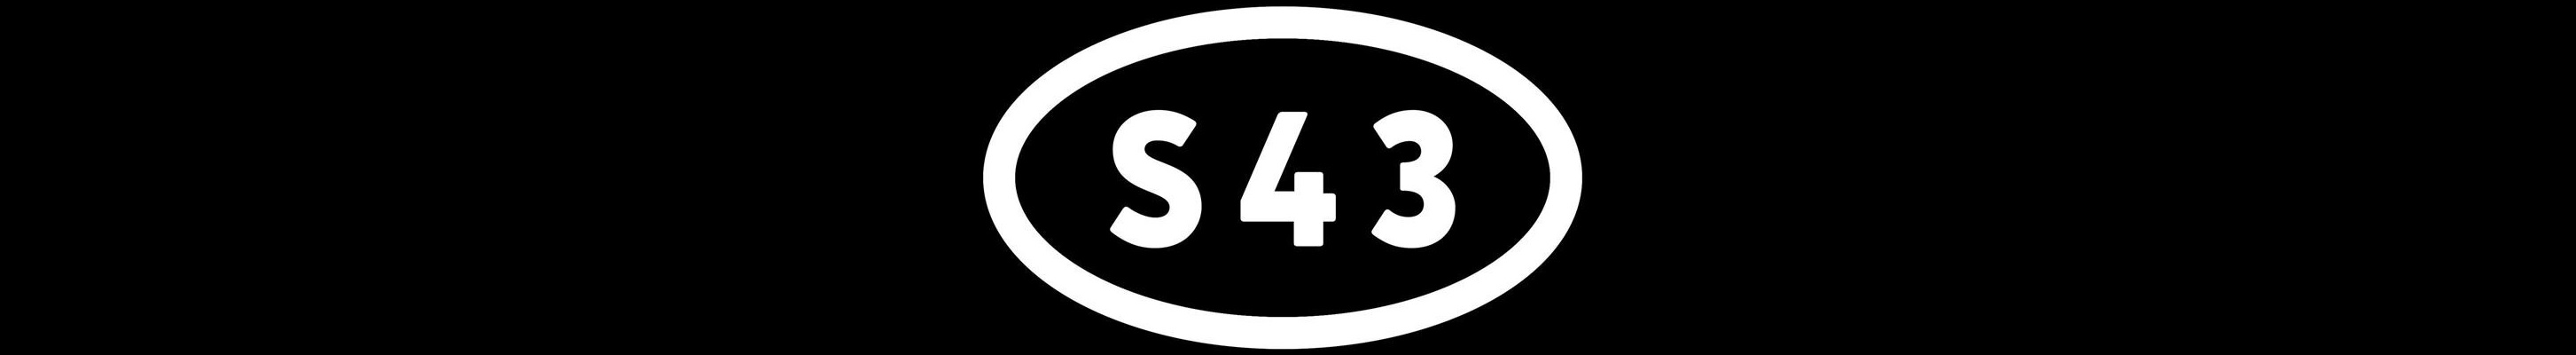 S43 Brewery